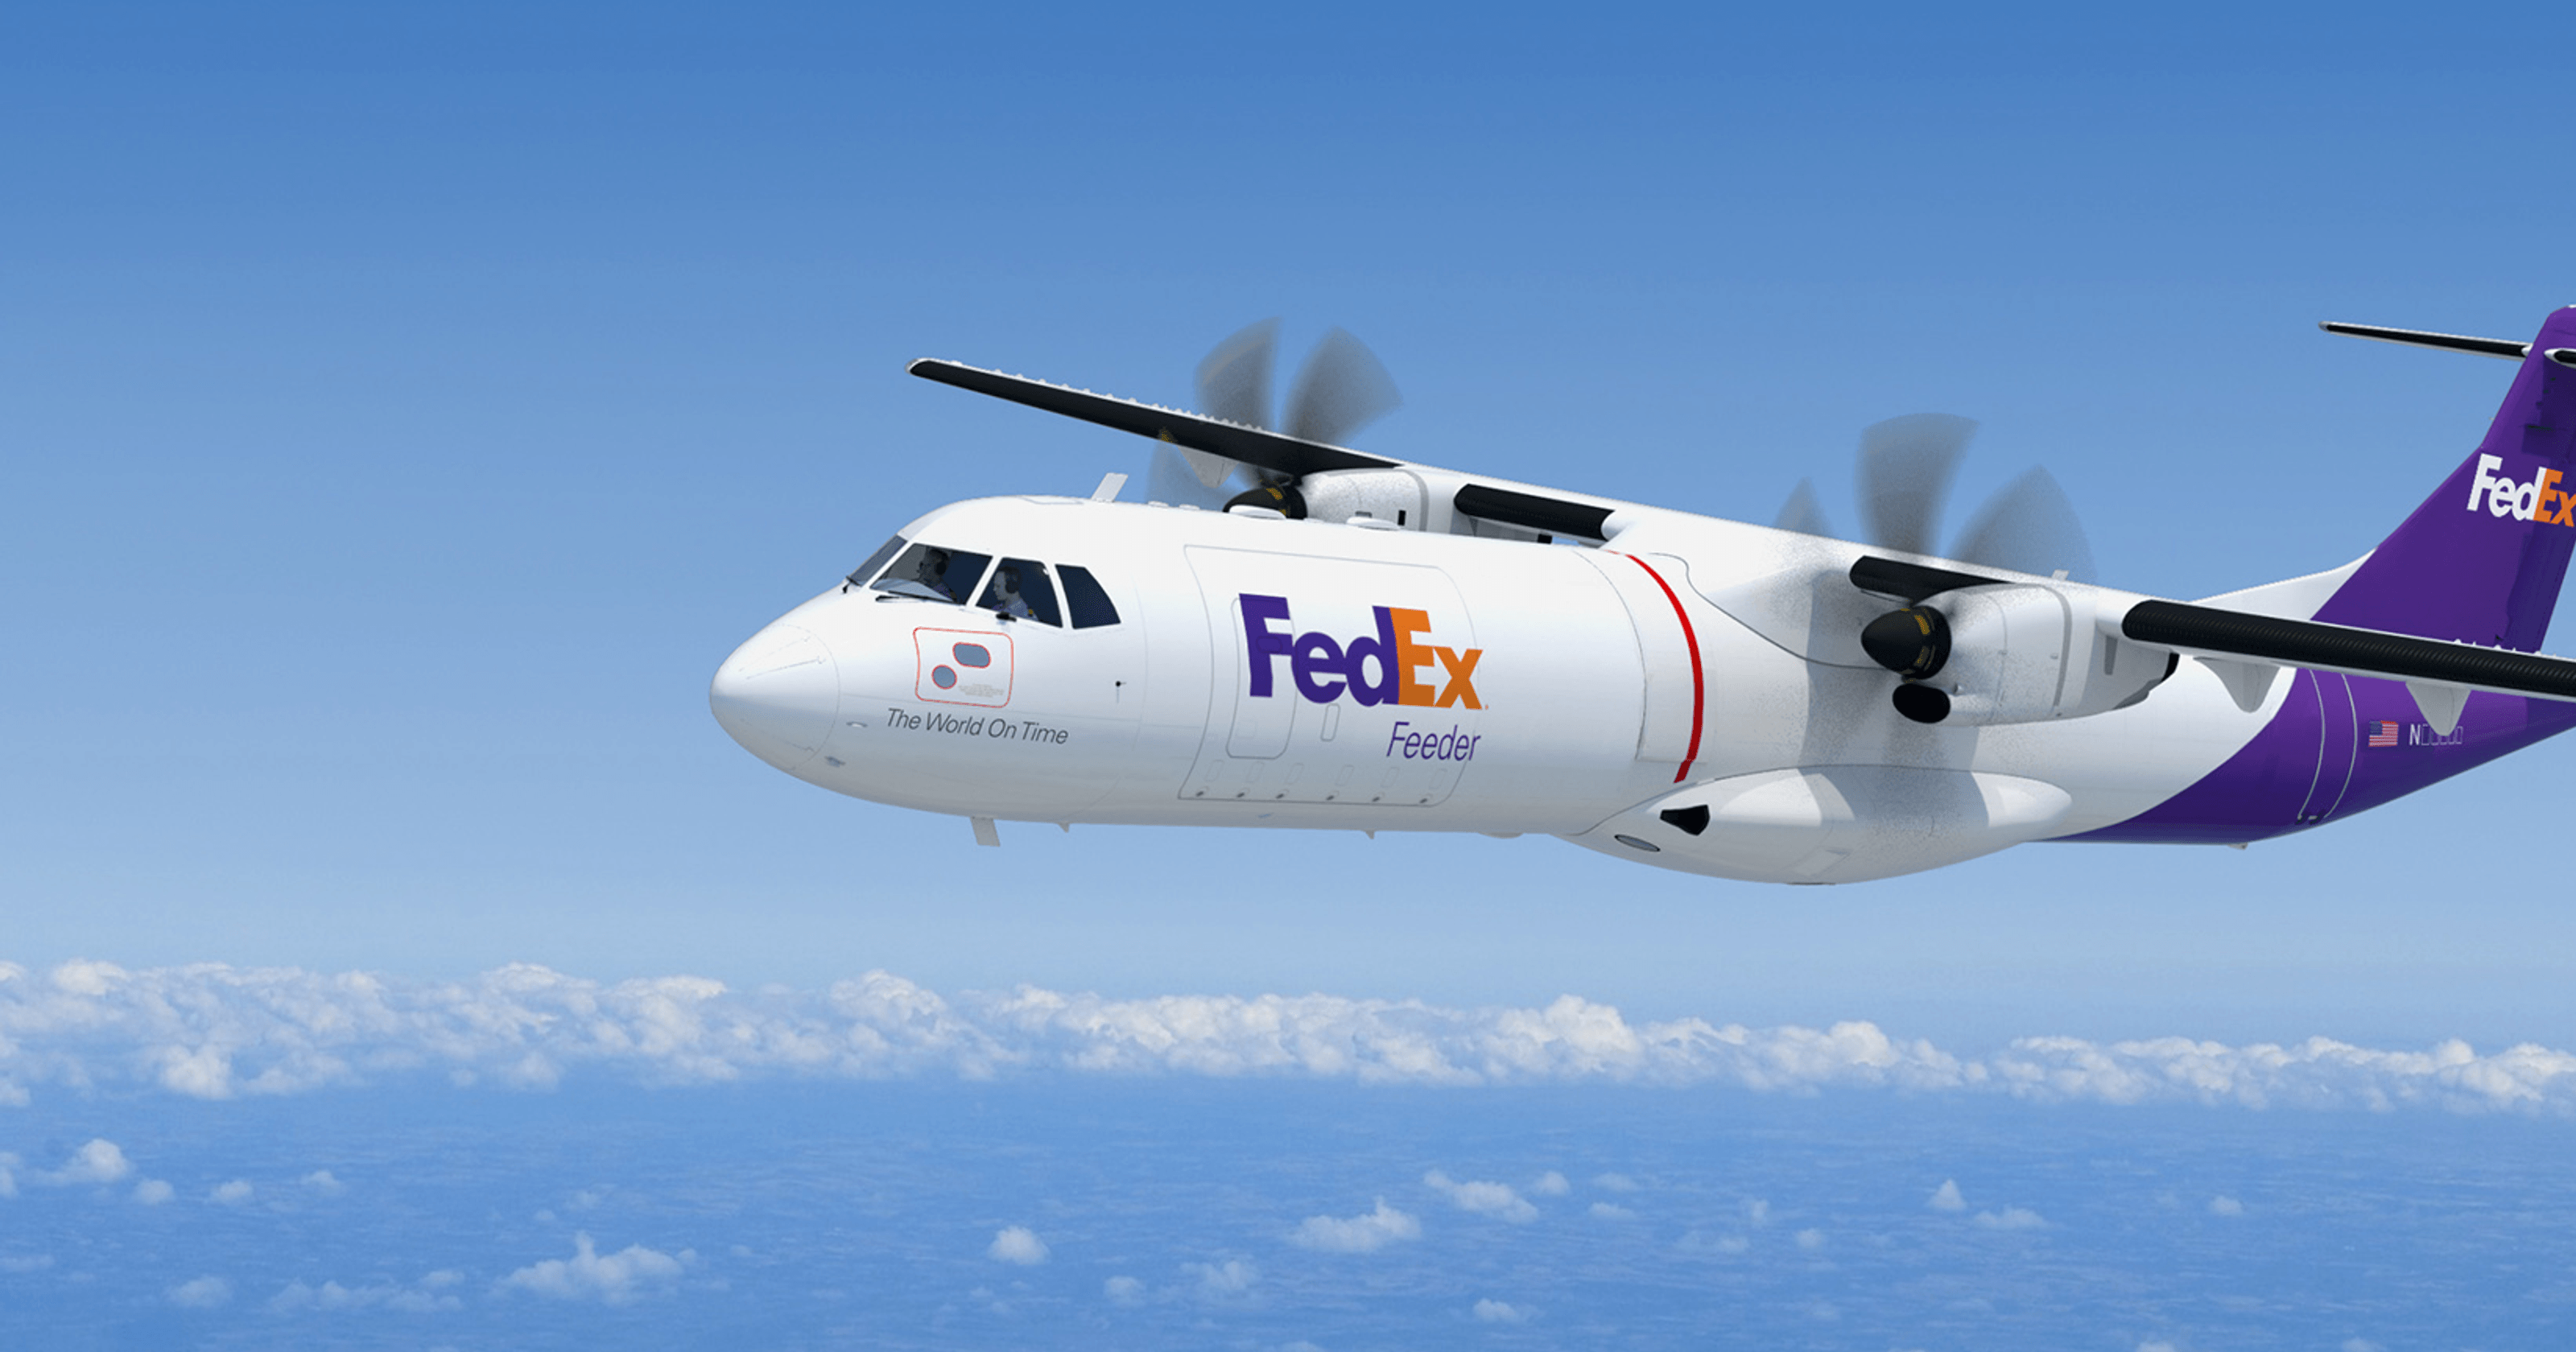 FedEx Airlines Logo - Pilot career path takes flight in FedEx venture with feeders, colleges